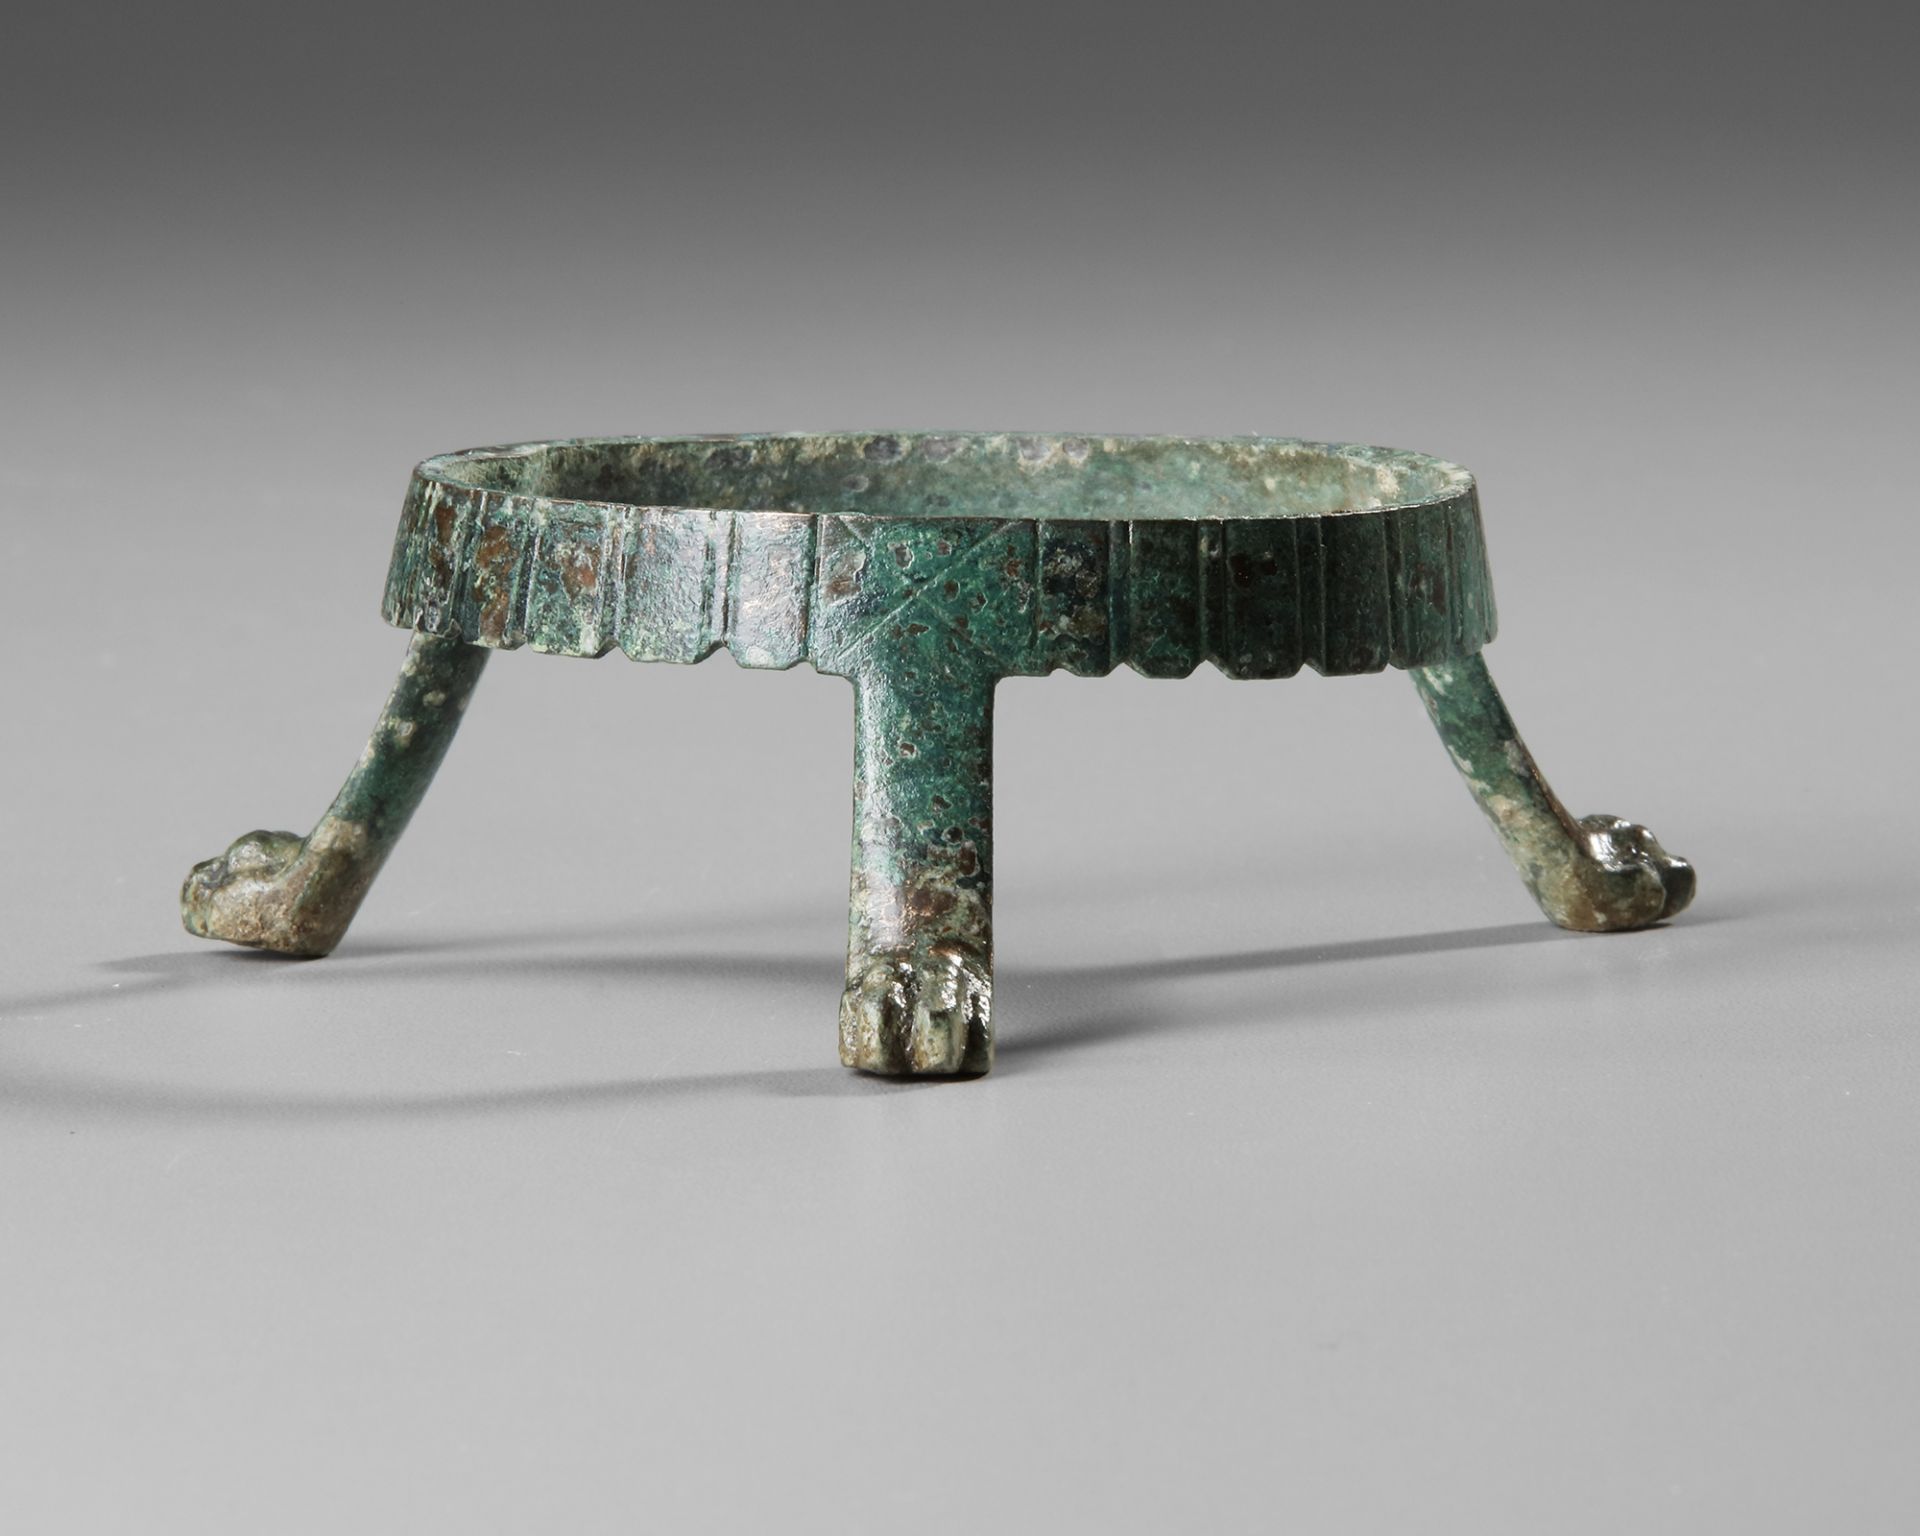 A BRONZE ROMAN STAND FOR CUPS, 2ND-3RD CENTURY AD - Image 2 of 3